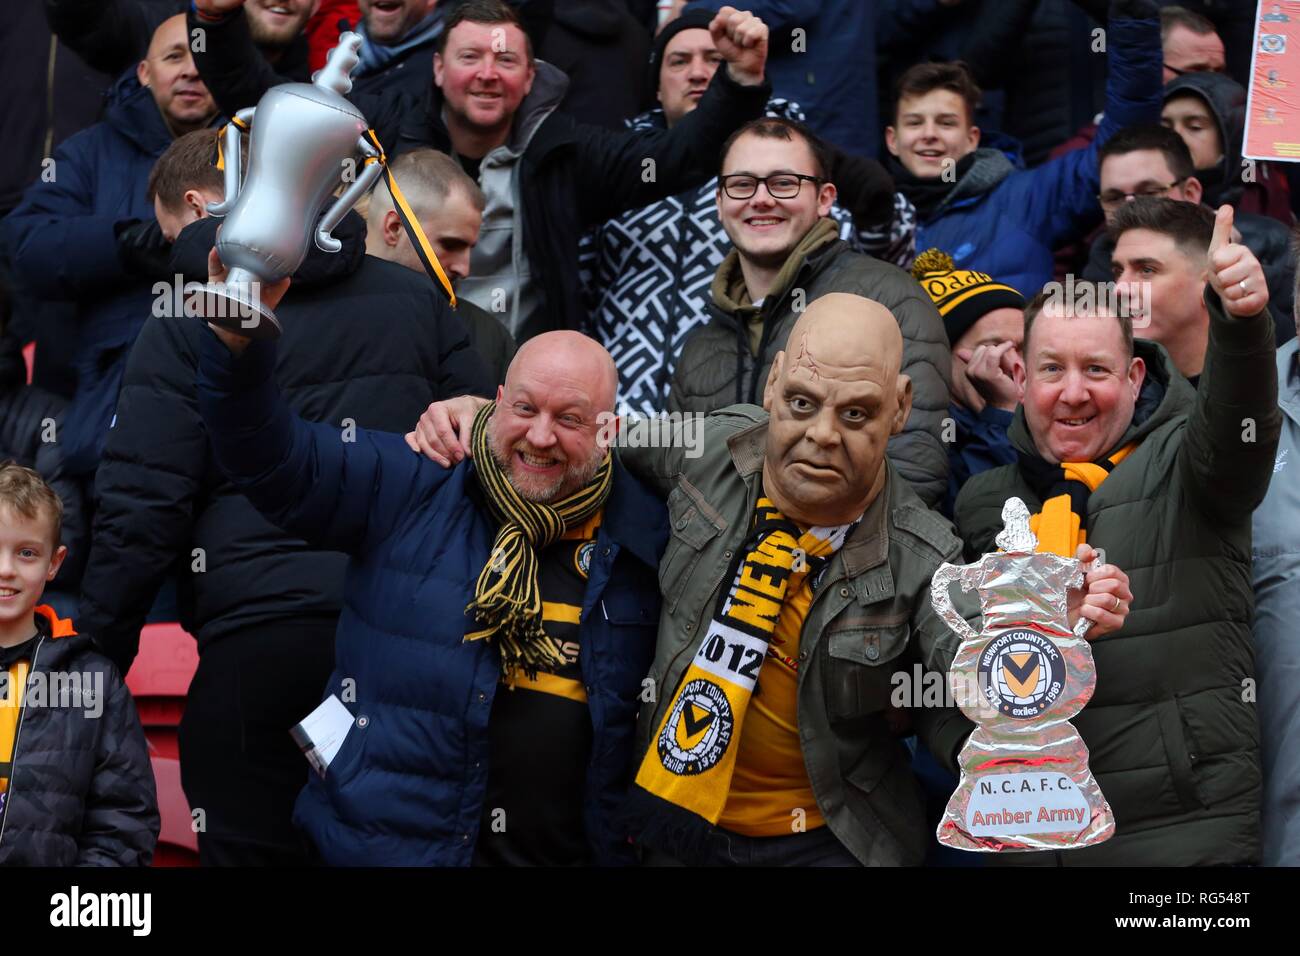 NEWPORT COUNTY FANS, MIDDLESBROUGH FC V NEWPORT COUNTY FC Middlesbrough FC V NEWPORT COUNTY FC, EMIRATES FA Cup 4. Runde, 2019 Stockfoto